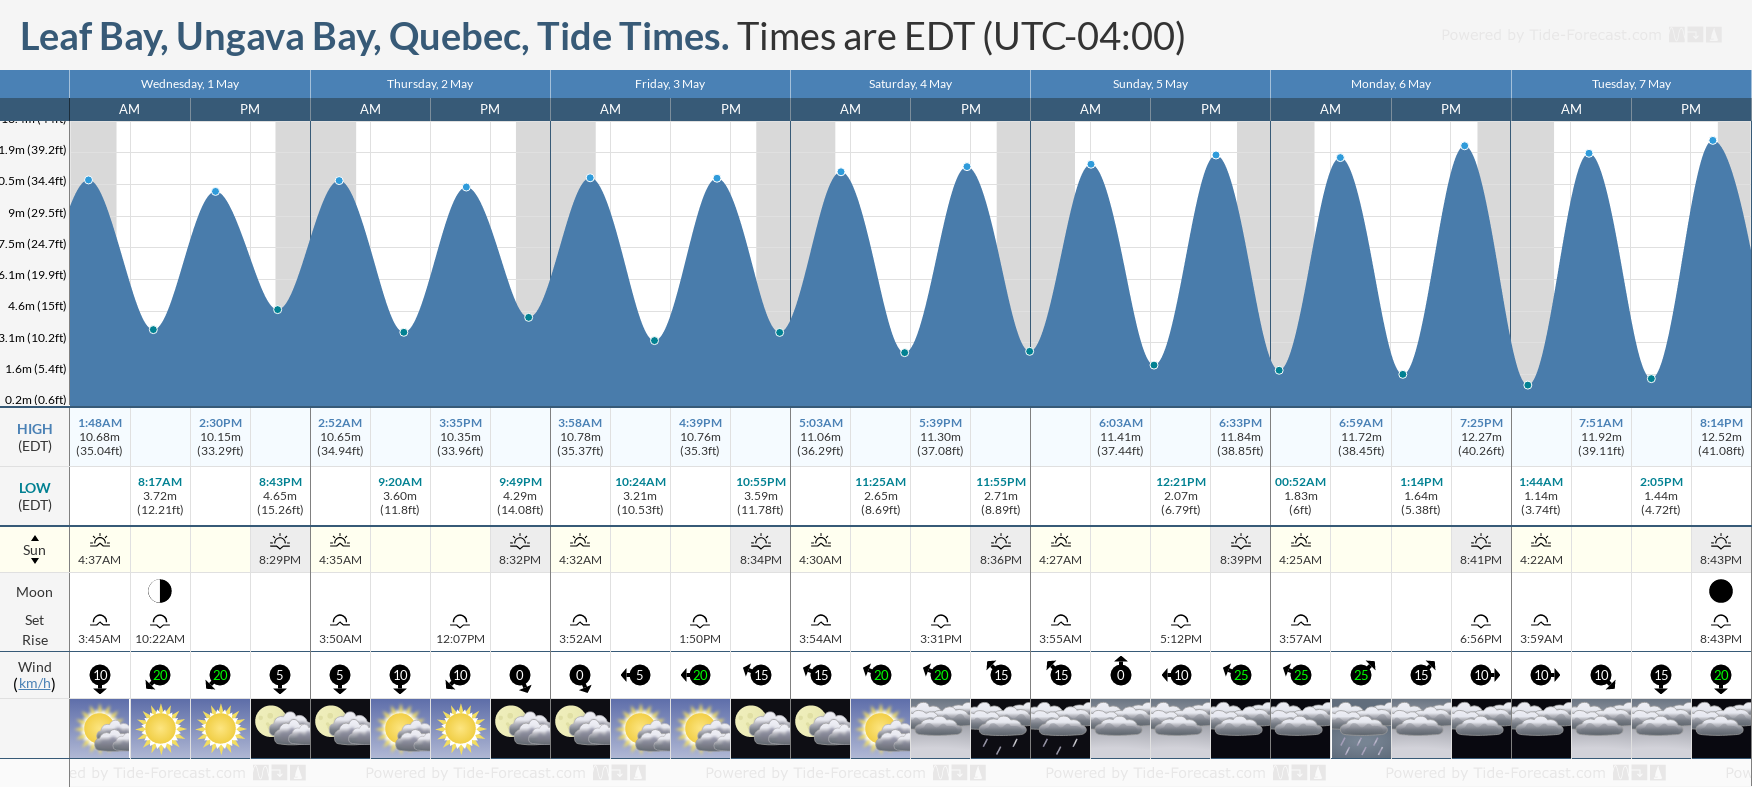 Leaf Bay, Ungava Bay, Quebec Tide Chart including high and low tide tide times for the next 7 days